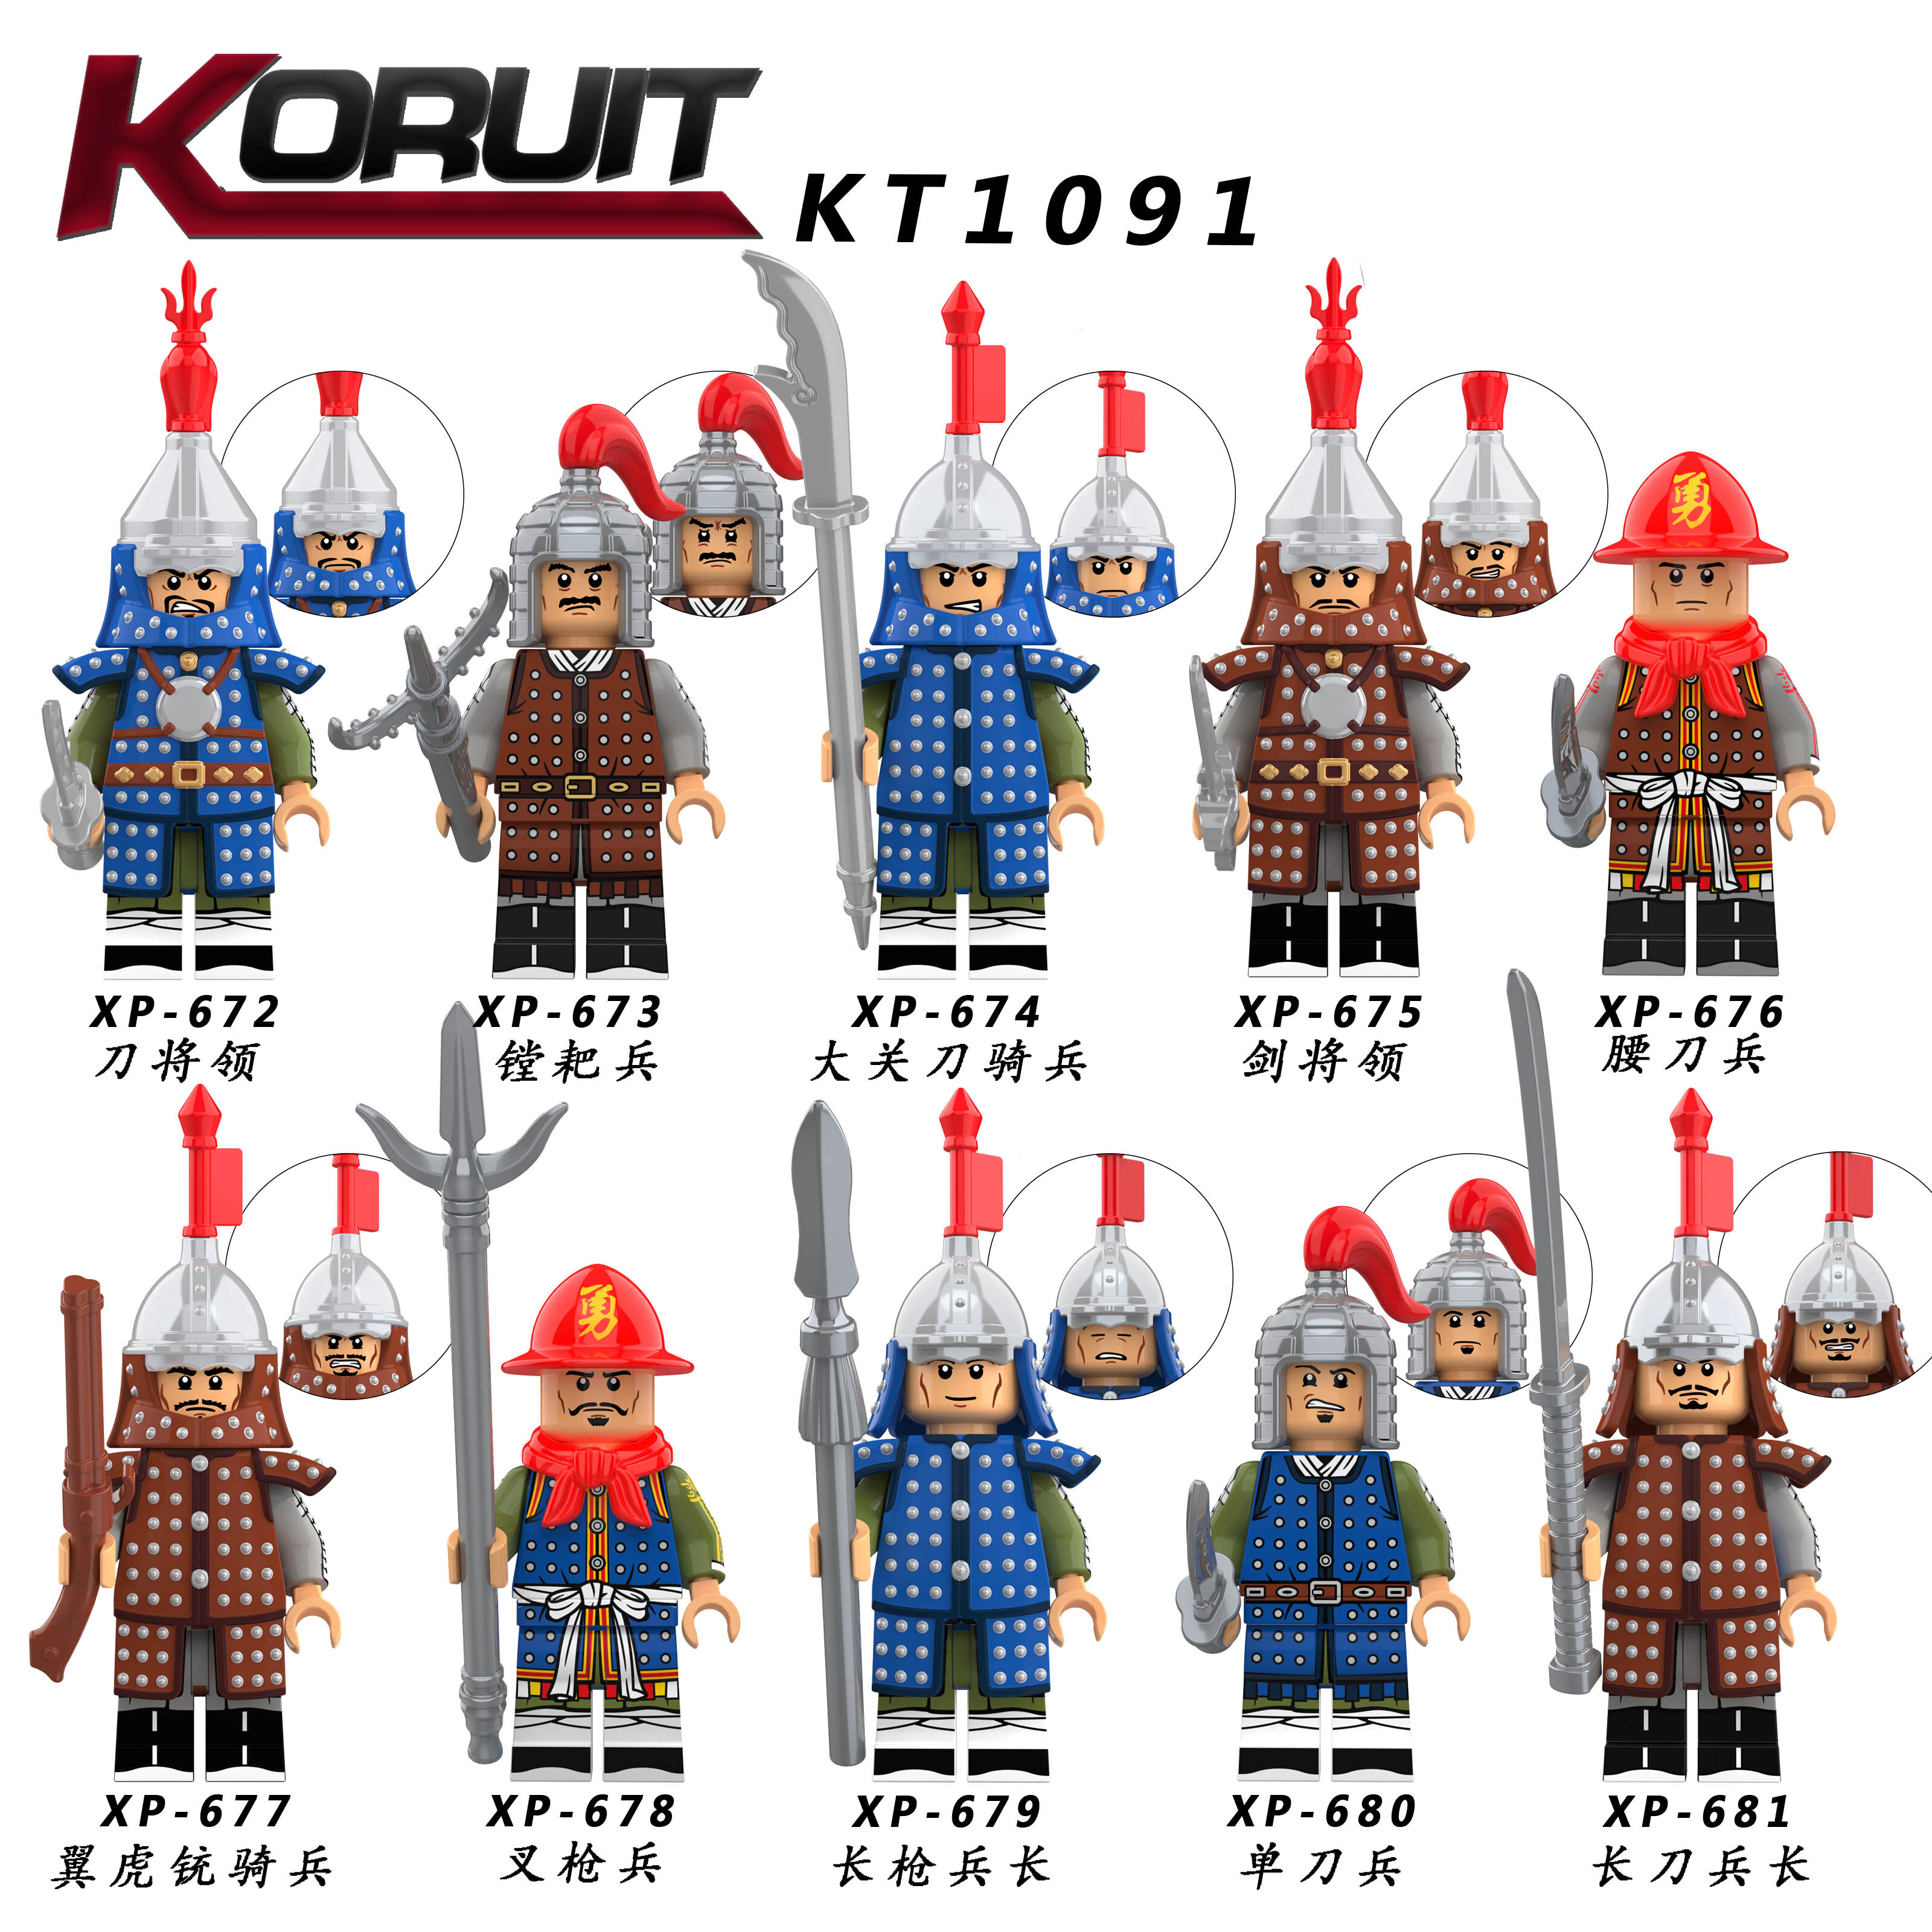 XP672 XP673 XP674 XP675 XP676 XP677 XP678 XP679 XP680 XP681 KT1091 Building Blocks Chinese Ancient Soldier Bricks Action Educational Toys for Kids Gifts 